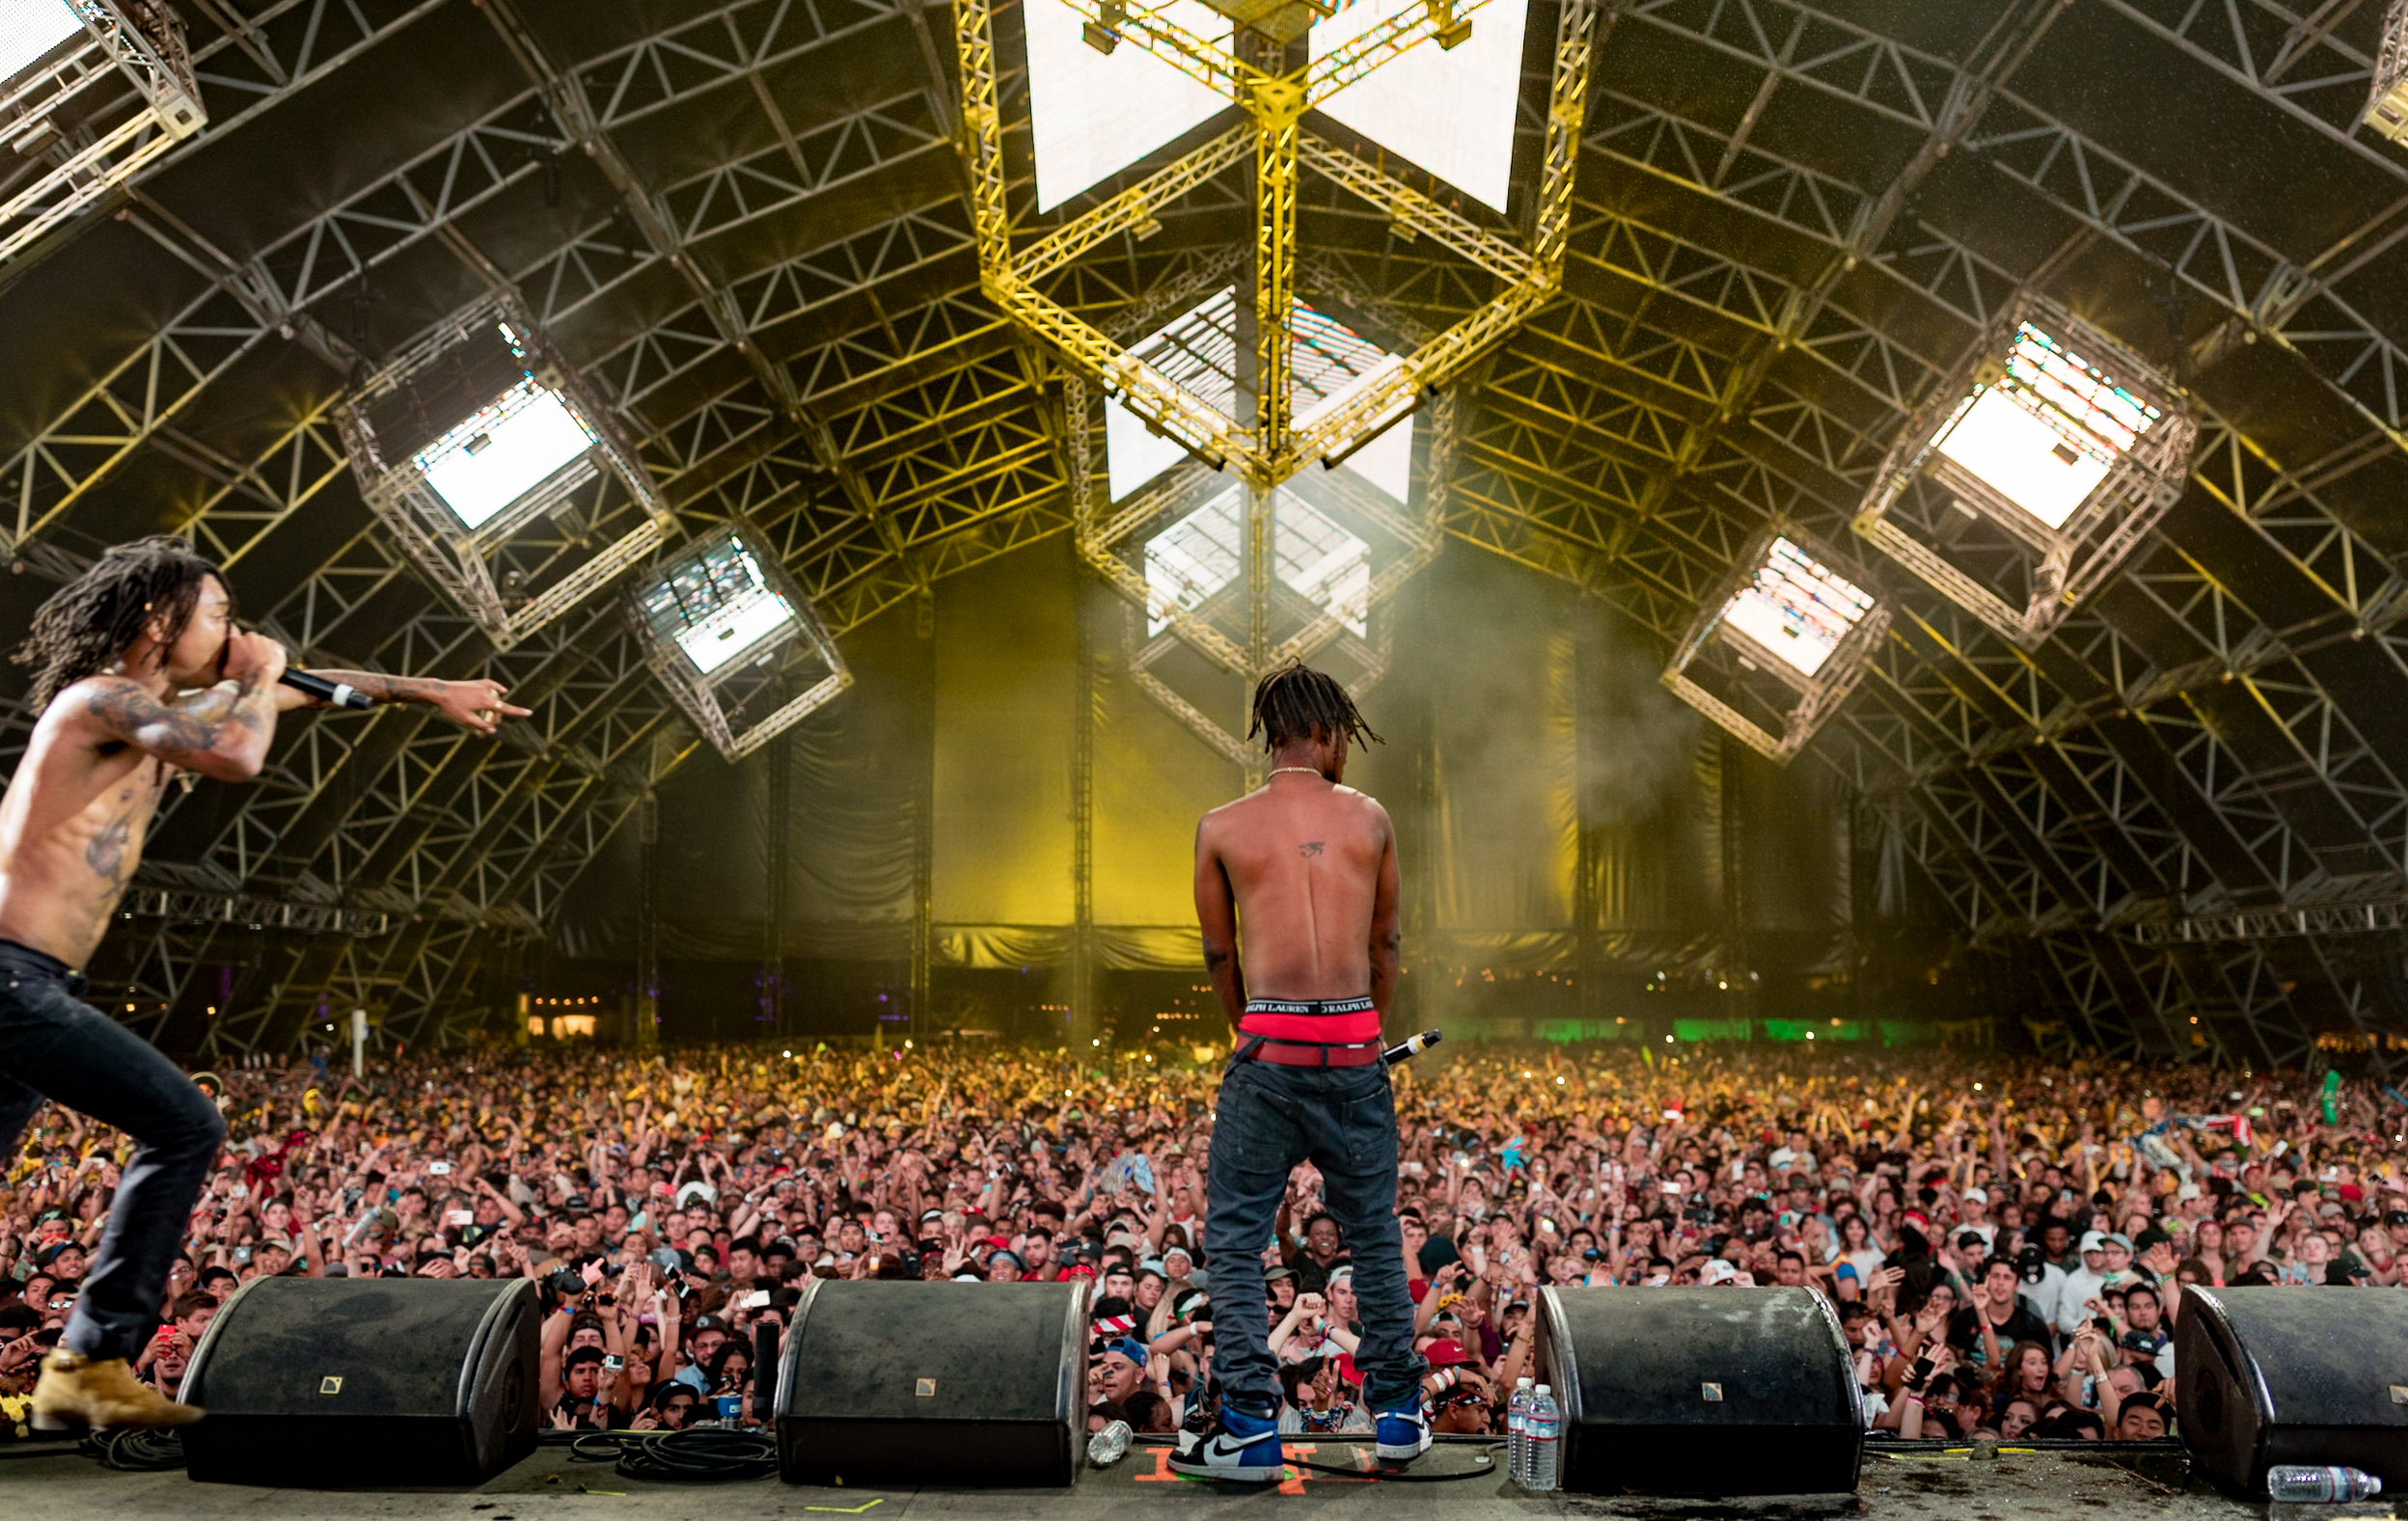 Rae Sremmurd at 2016 Coachella Valley Music And Arts Festival - Weekend 2 - Day 1